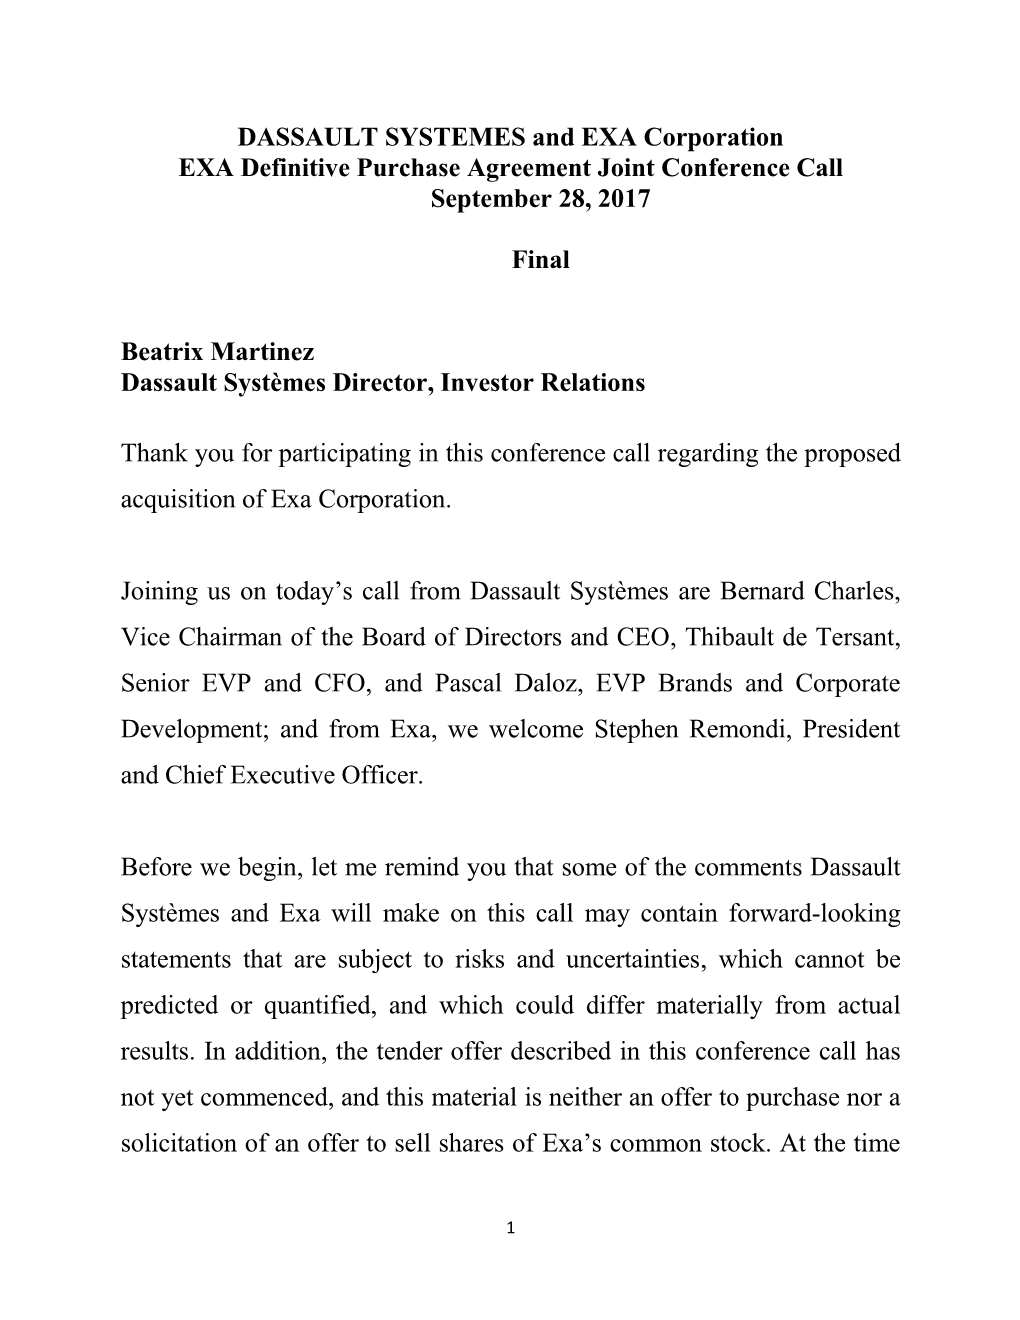 EXA Corporation EXA Definitive Purchase Agreement Joint Conference Call September 28, 2017